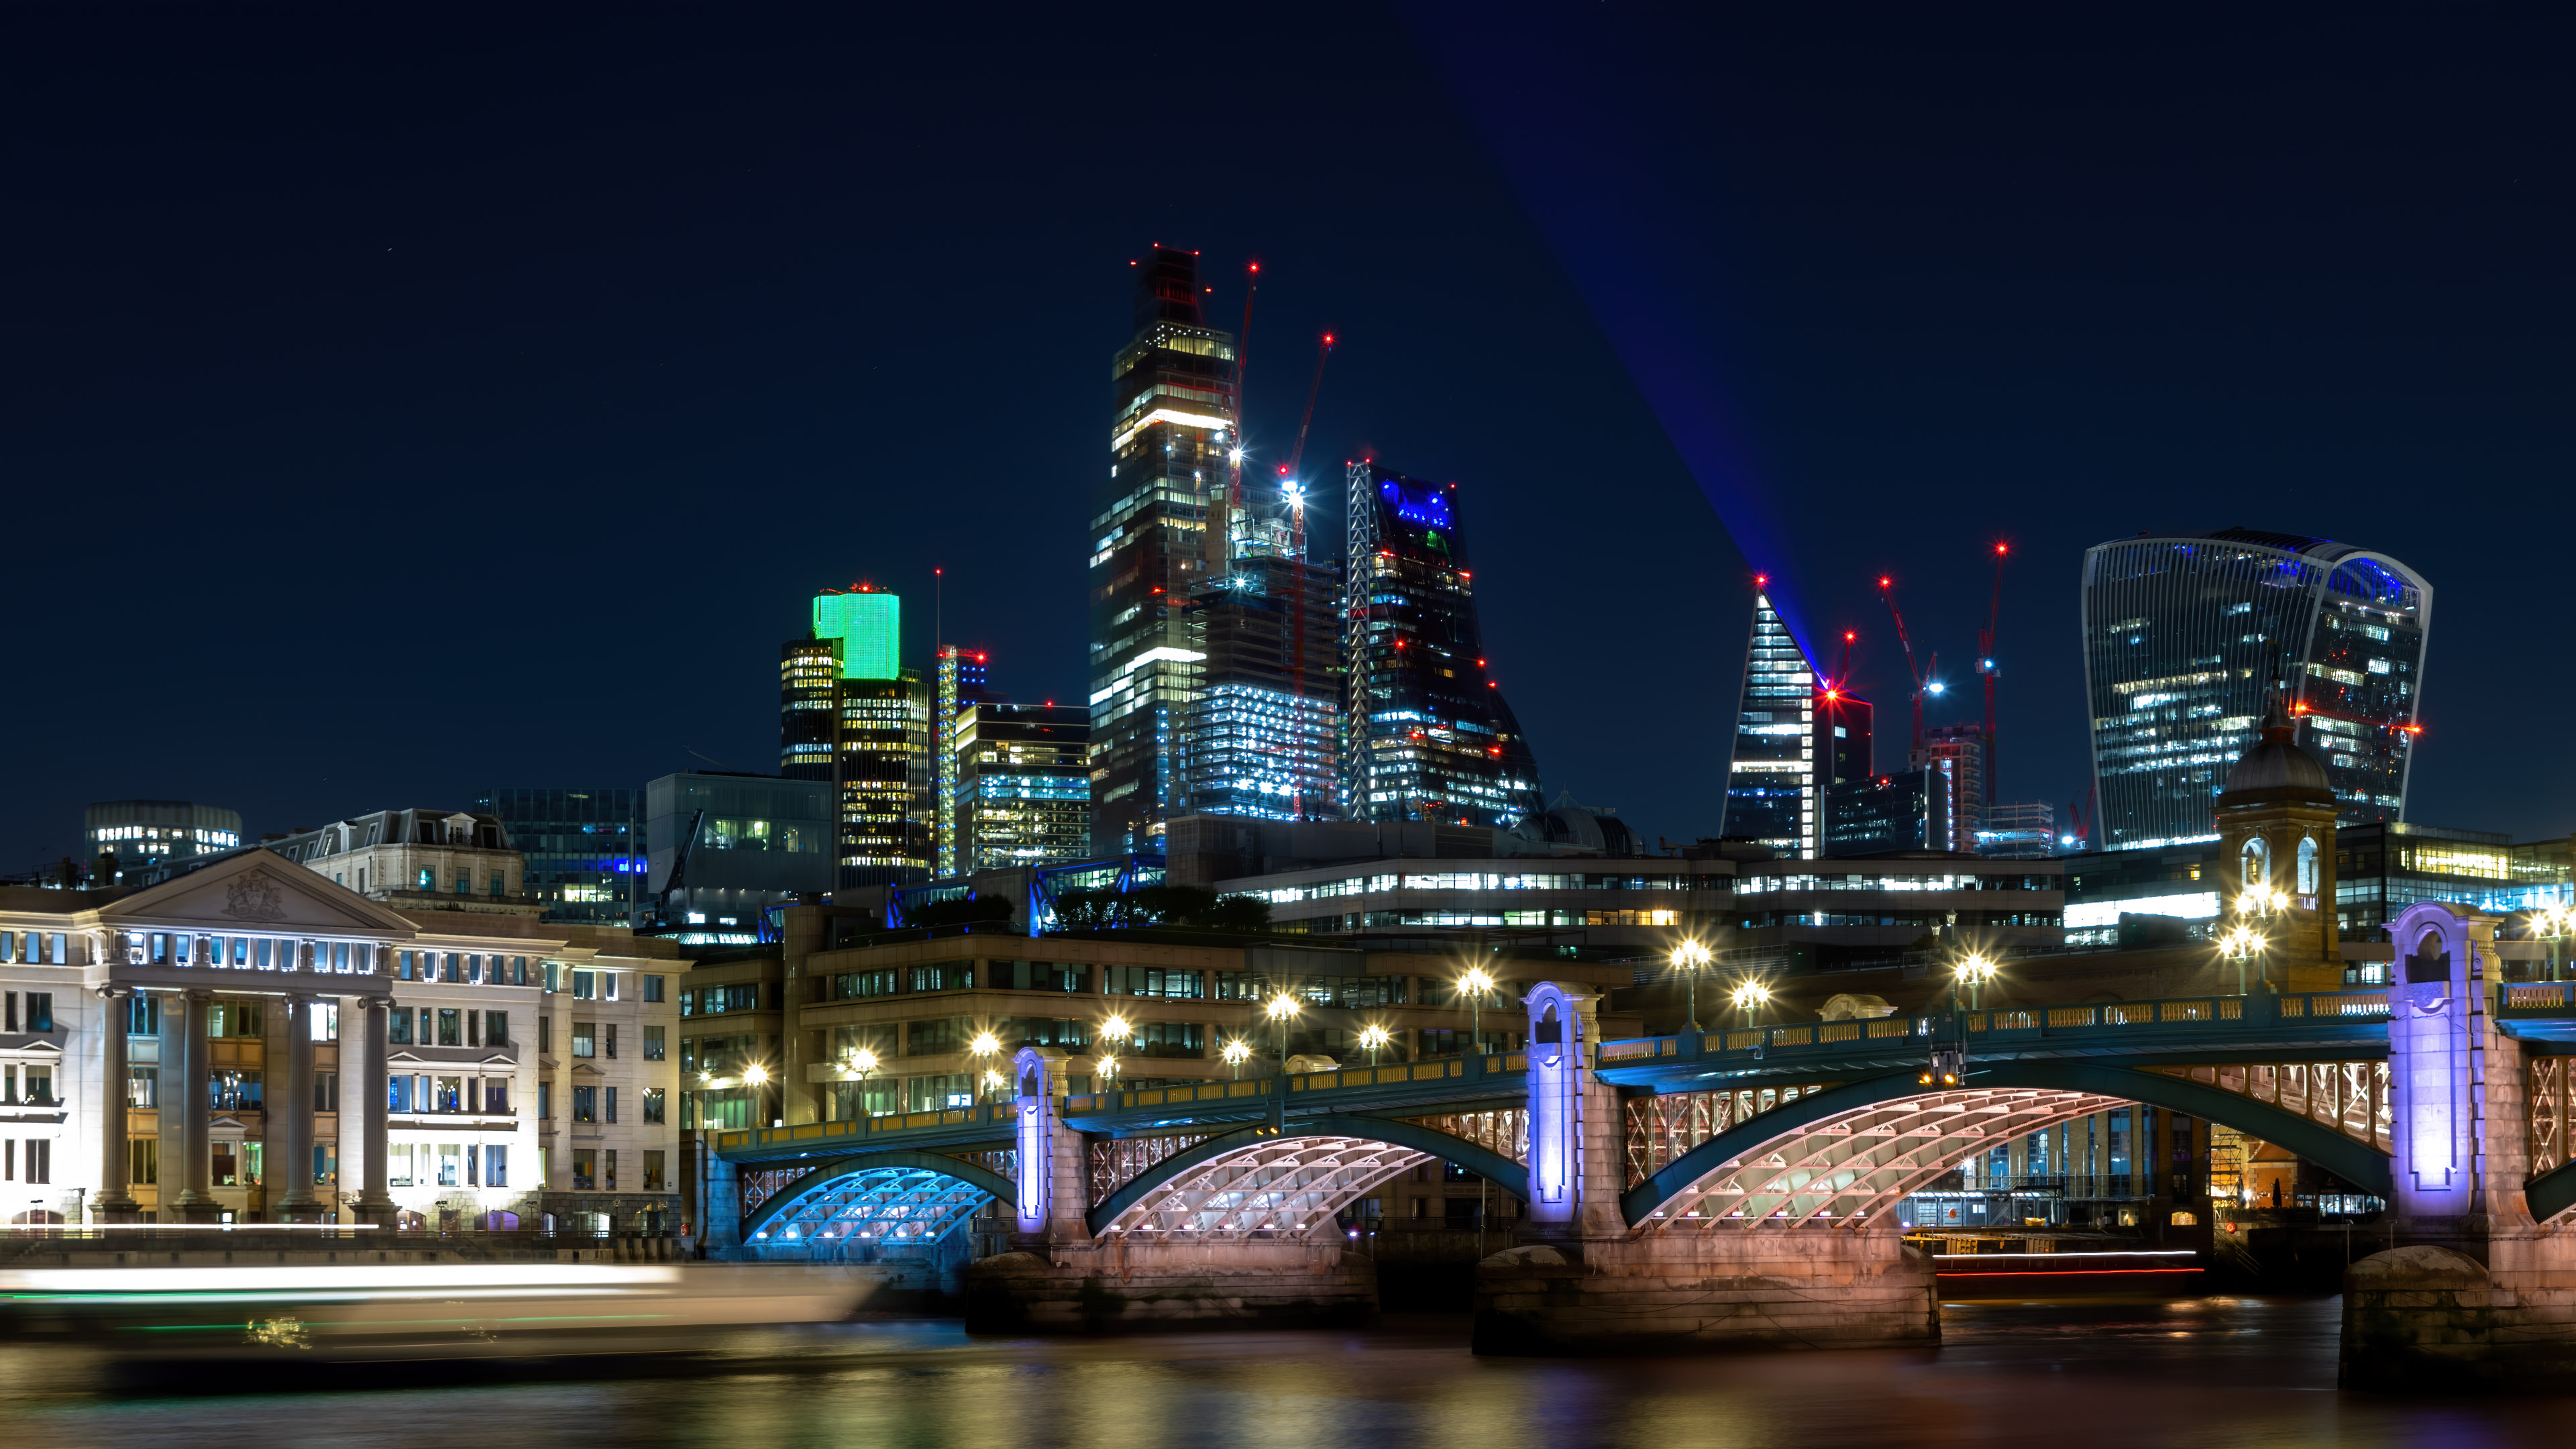 Get lost in the beauty of London's cityscape at night with our stunning wallpaper.